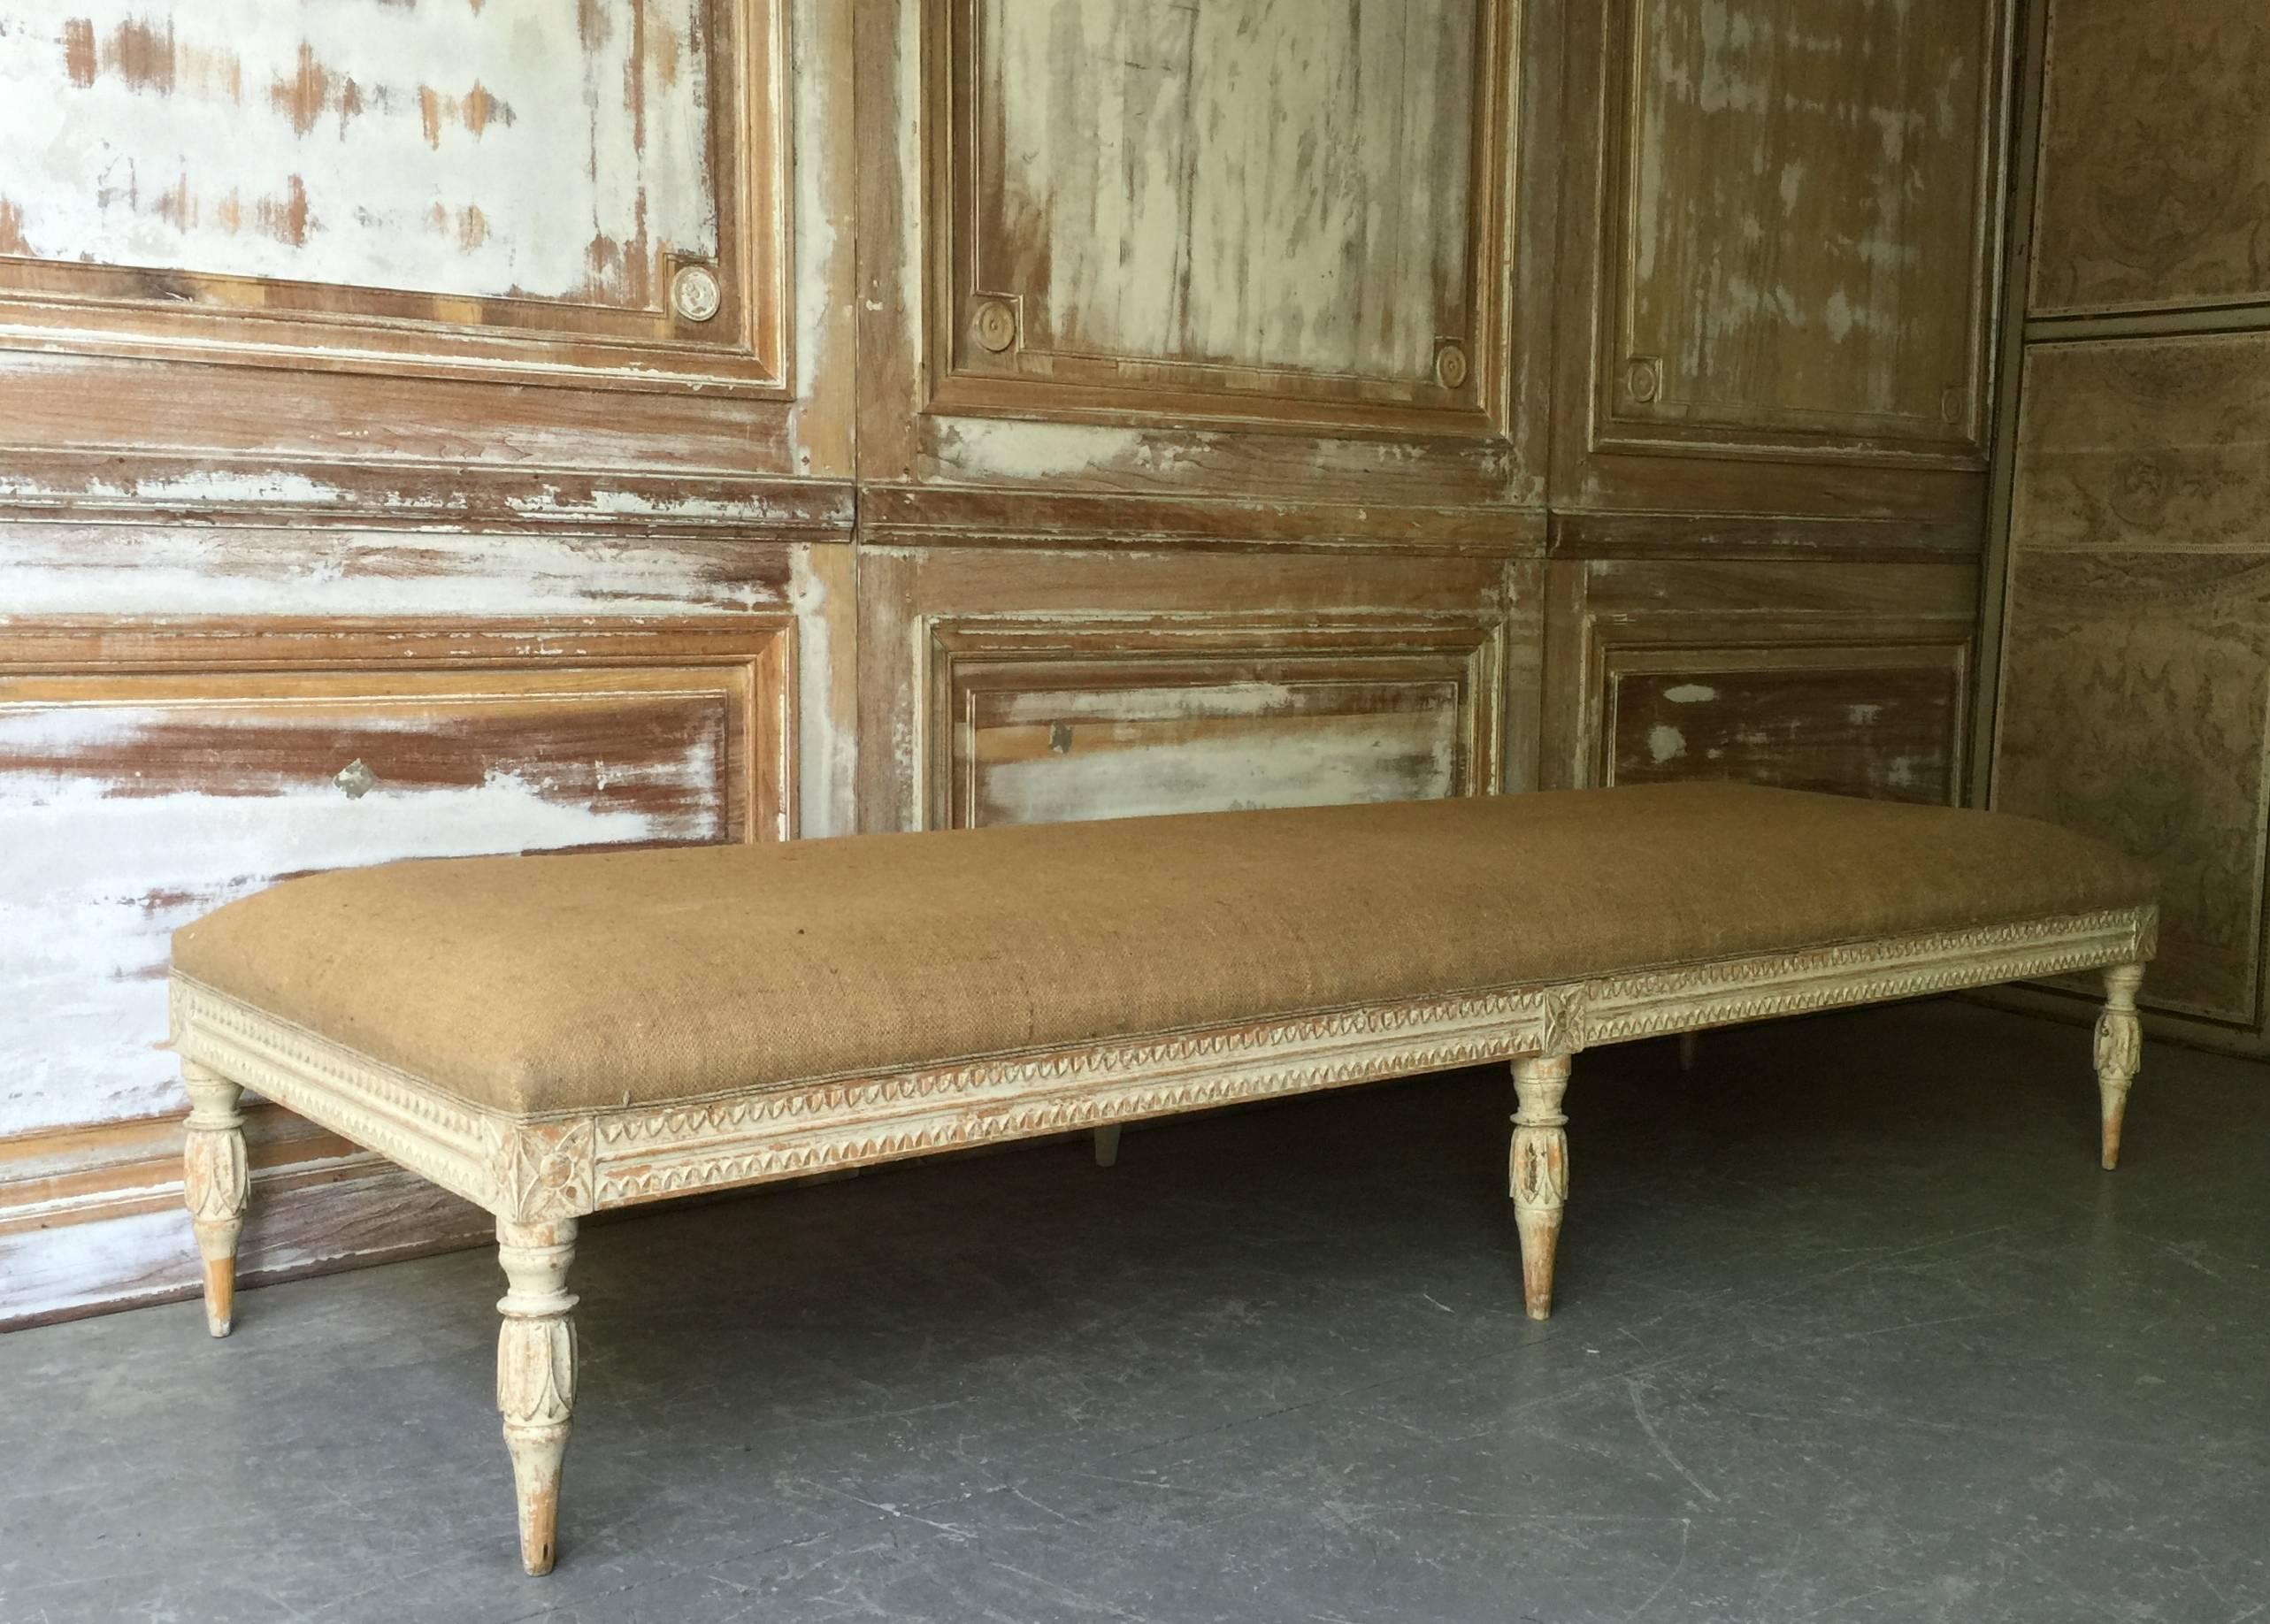 Swedish period Gustavian daybed or large bench, circa 1800, with richly decorated with scrolling carvings to three sides and skillfully carved fluted legs. Time worn patina and upholstered in natural jute. Timeless antique style, ready for your home